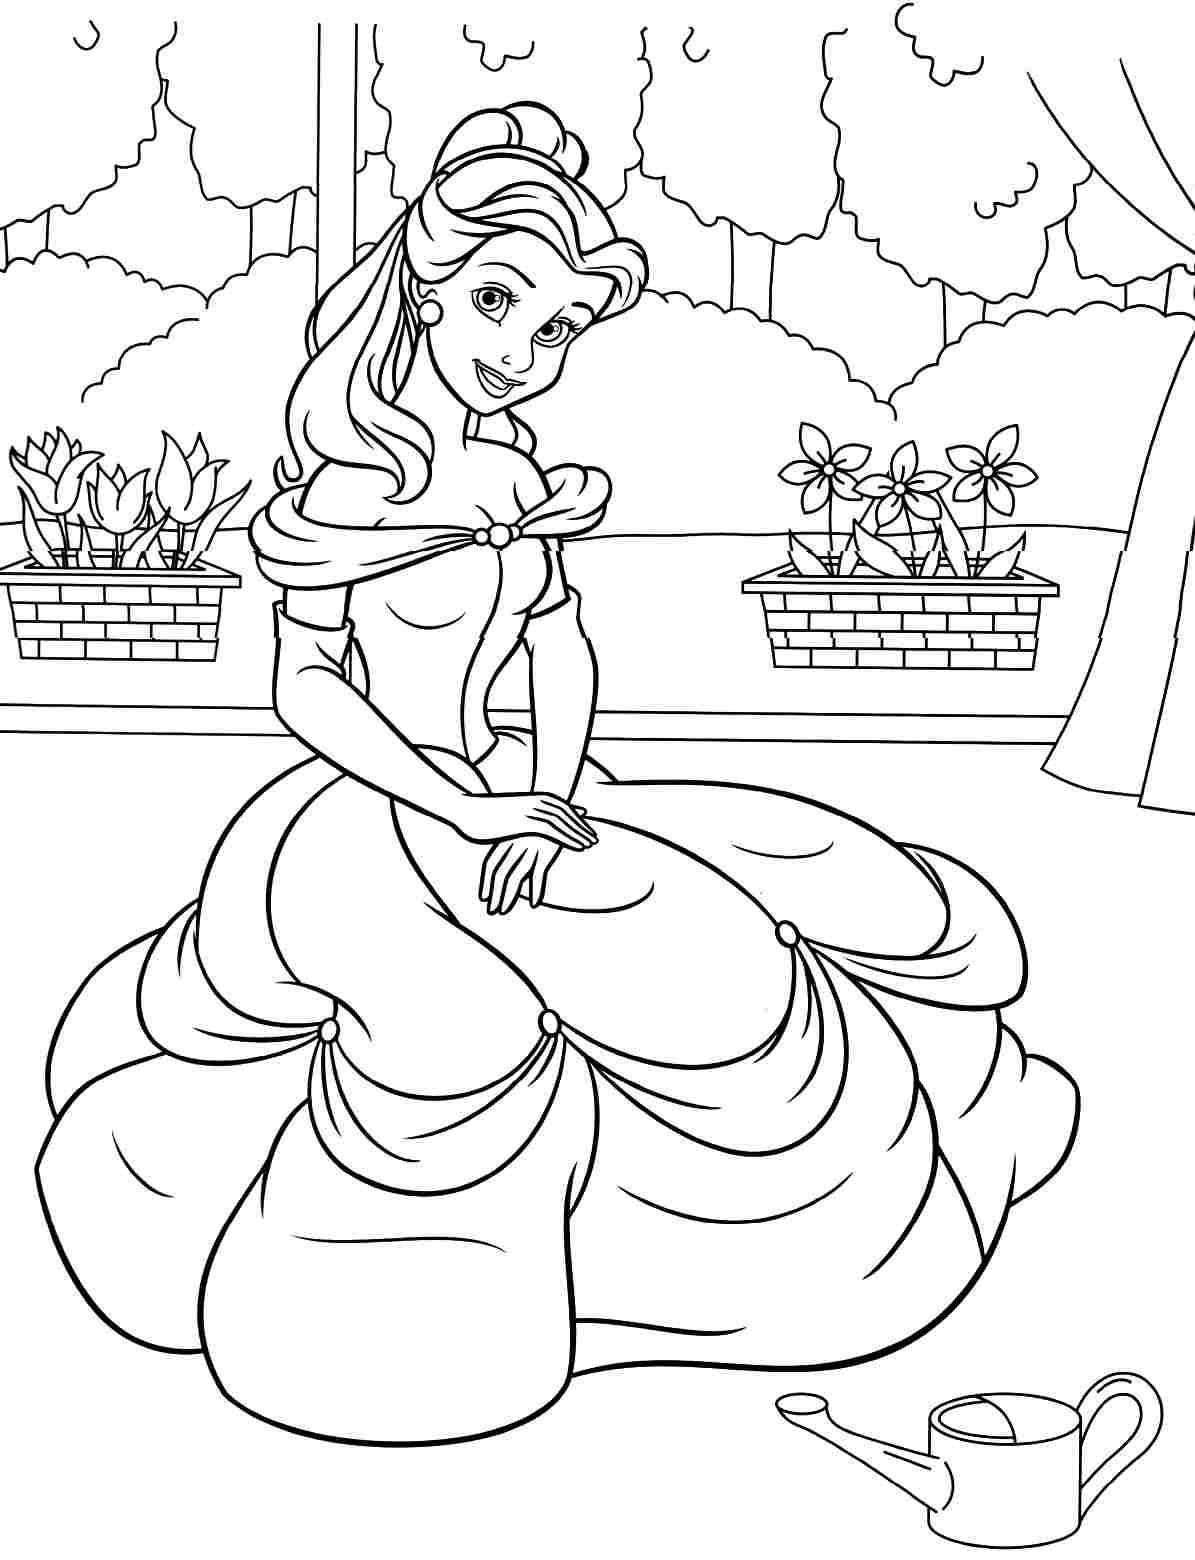 get-belle-coloring-pages-iremiss